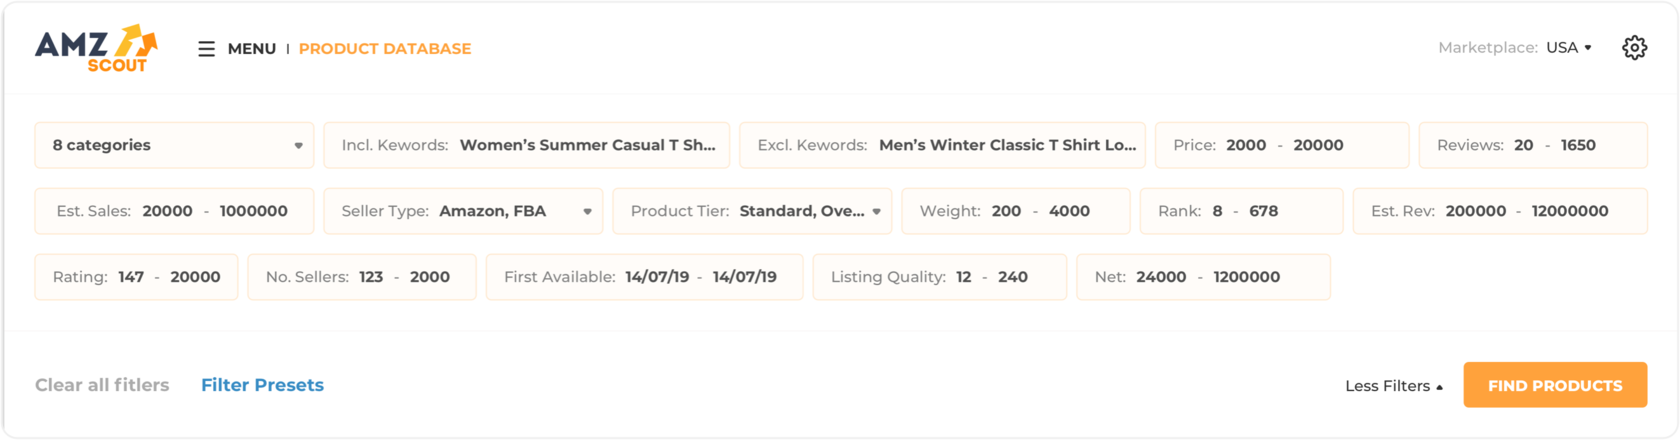 How to set filters on AMZScout Product Database to find a product to sell on Amazon